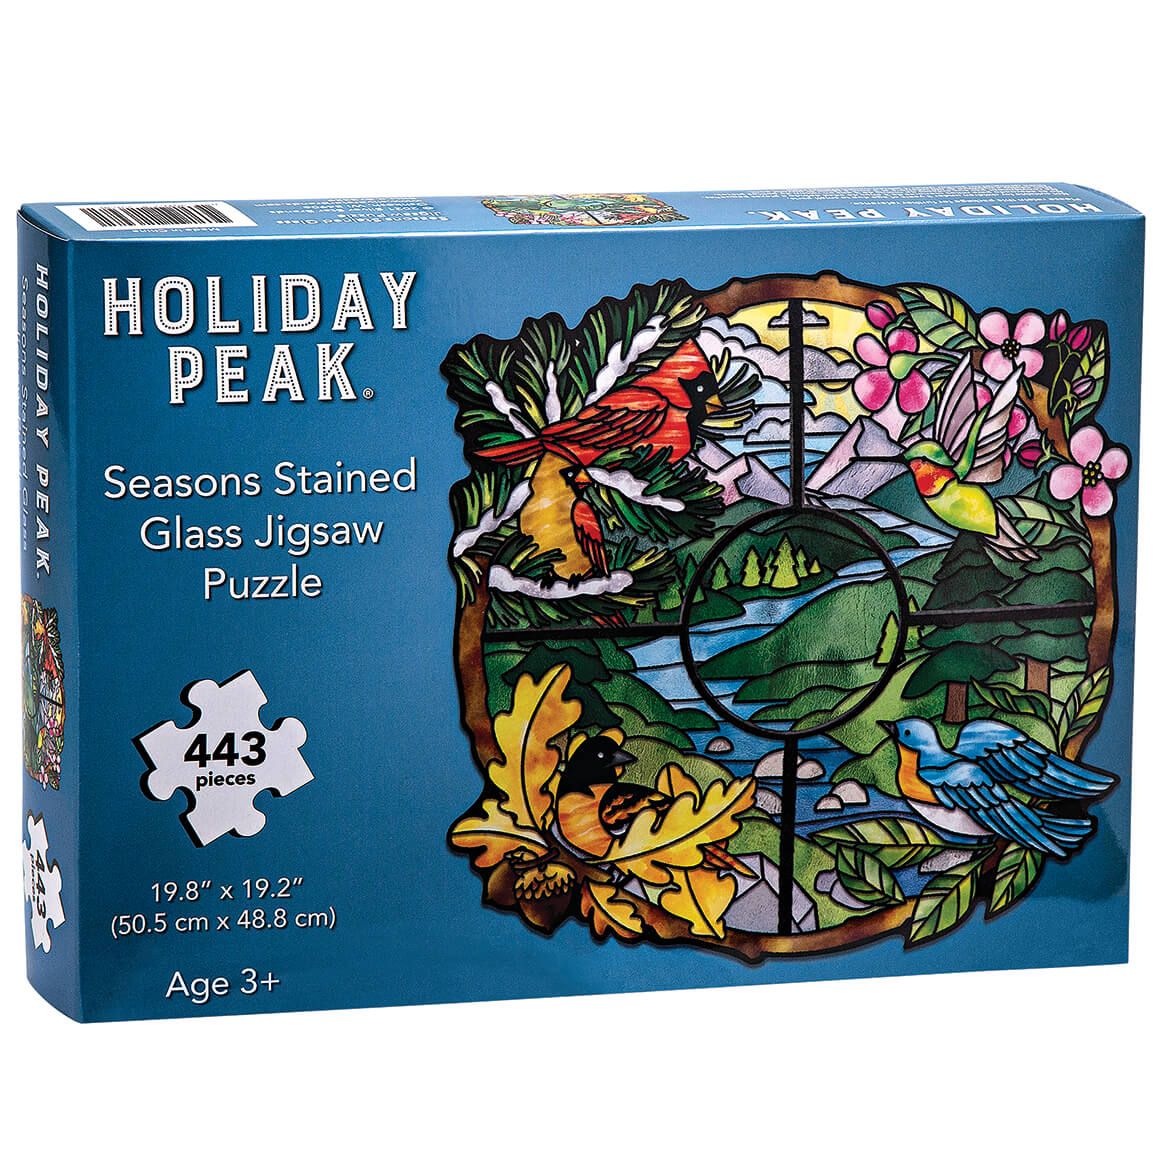 Seasons Stained Glass Jigsaw Puzzle by Holiday Peak™, 443 pieces + '-' + 373339